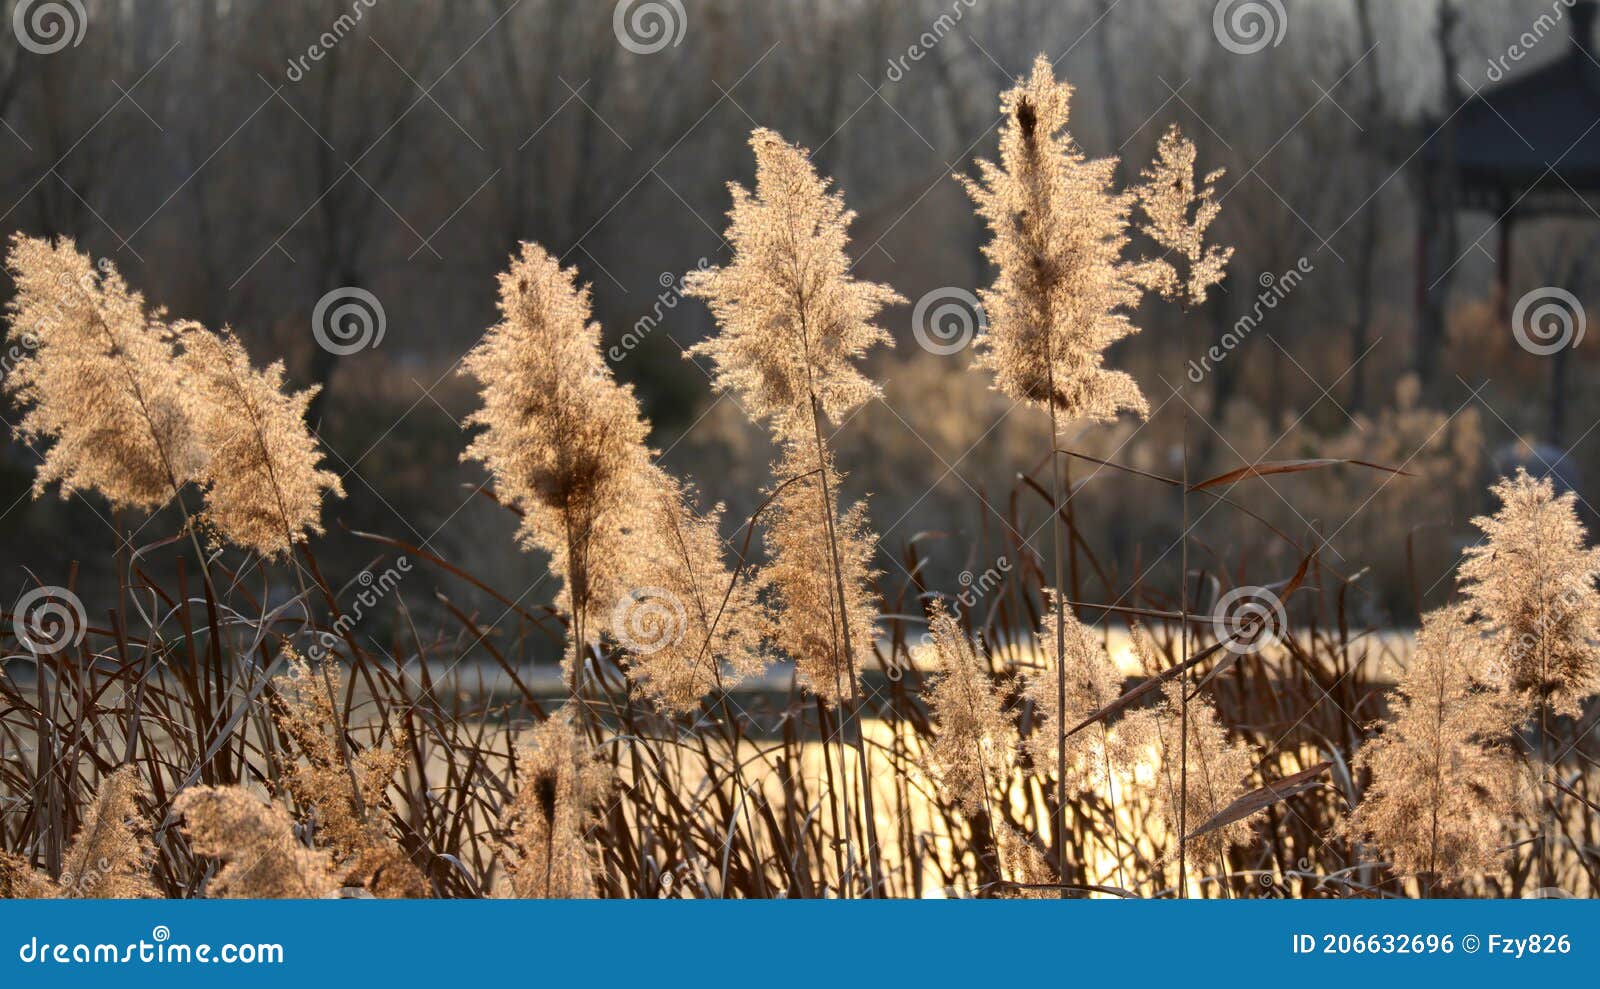 Reeds in winter stock photo. Image of beautiful, color - 206632696